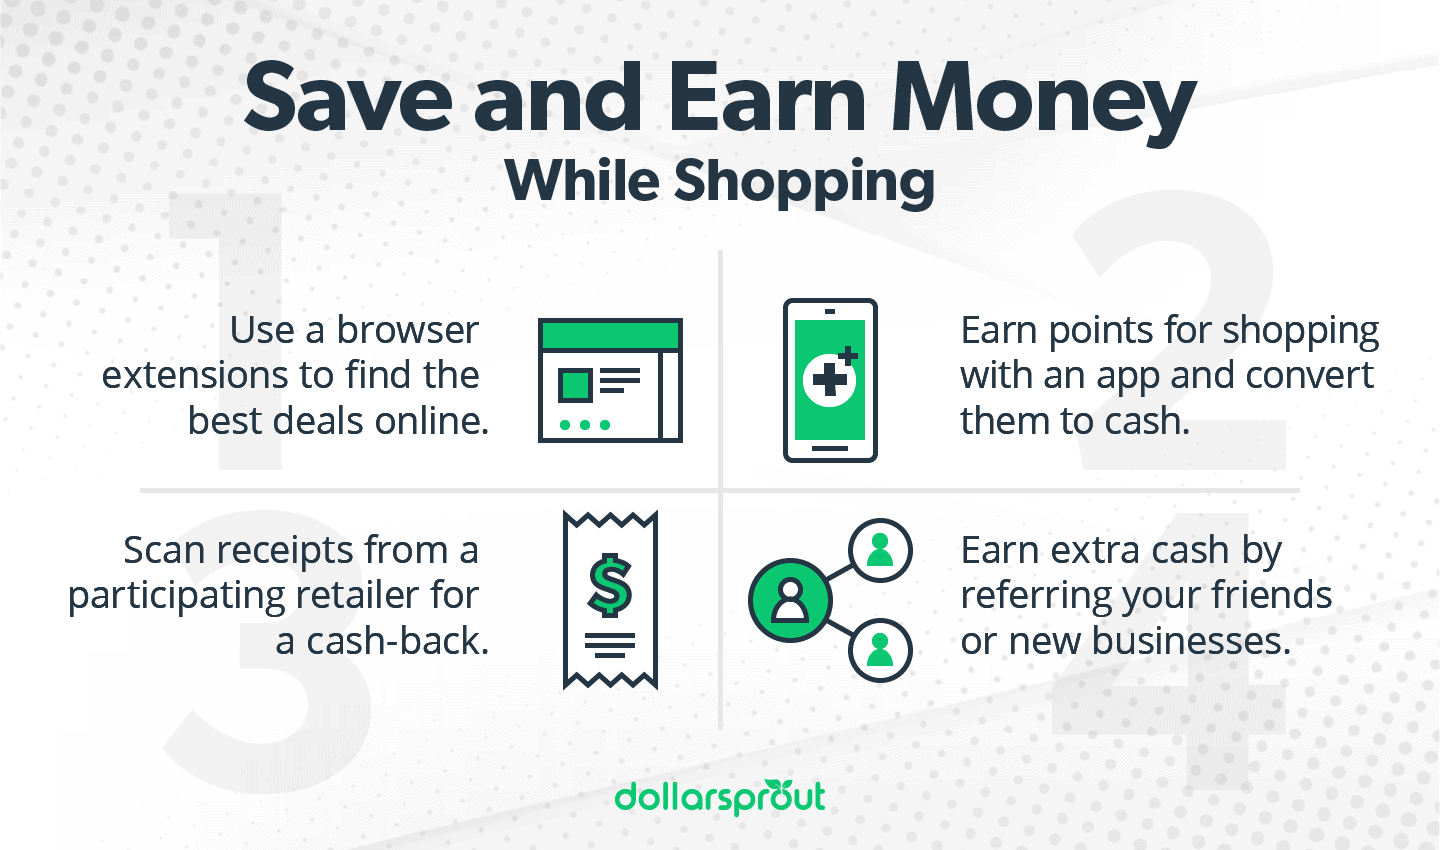 Save and Earn Money While Shopping